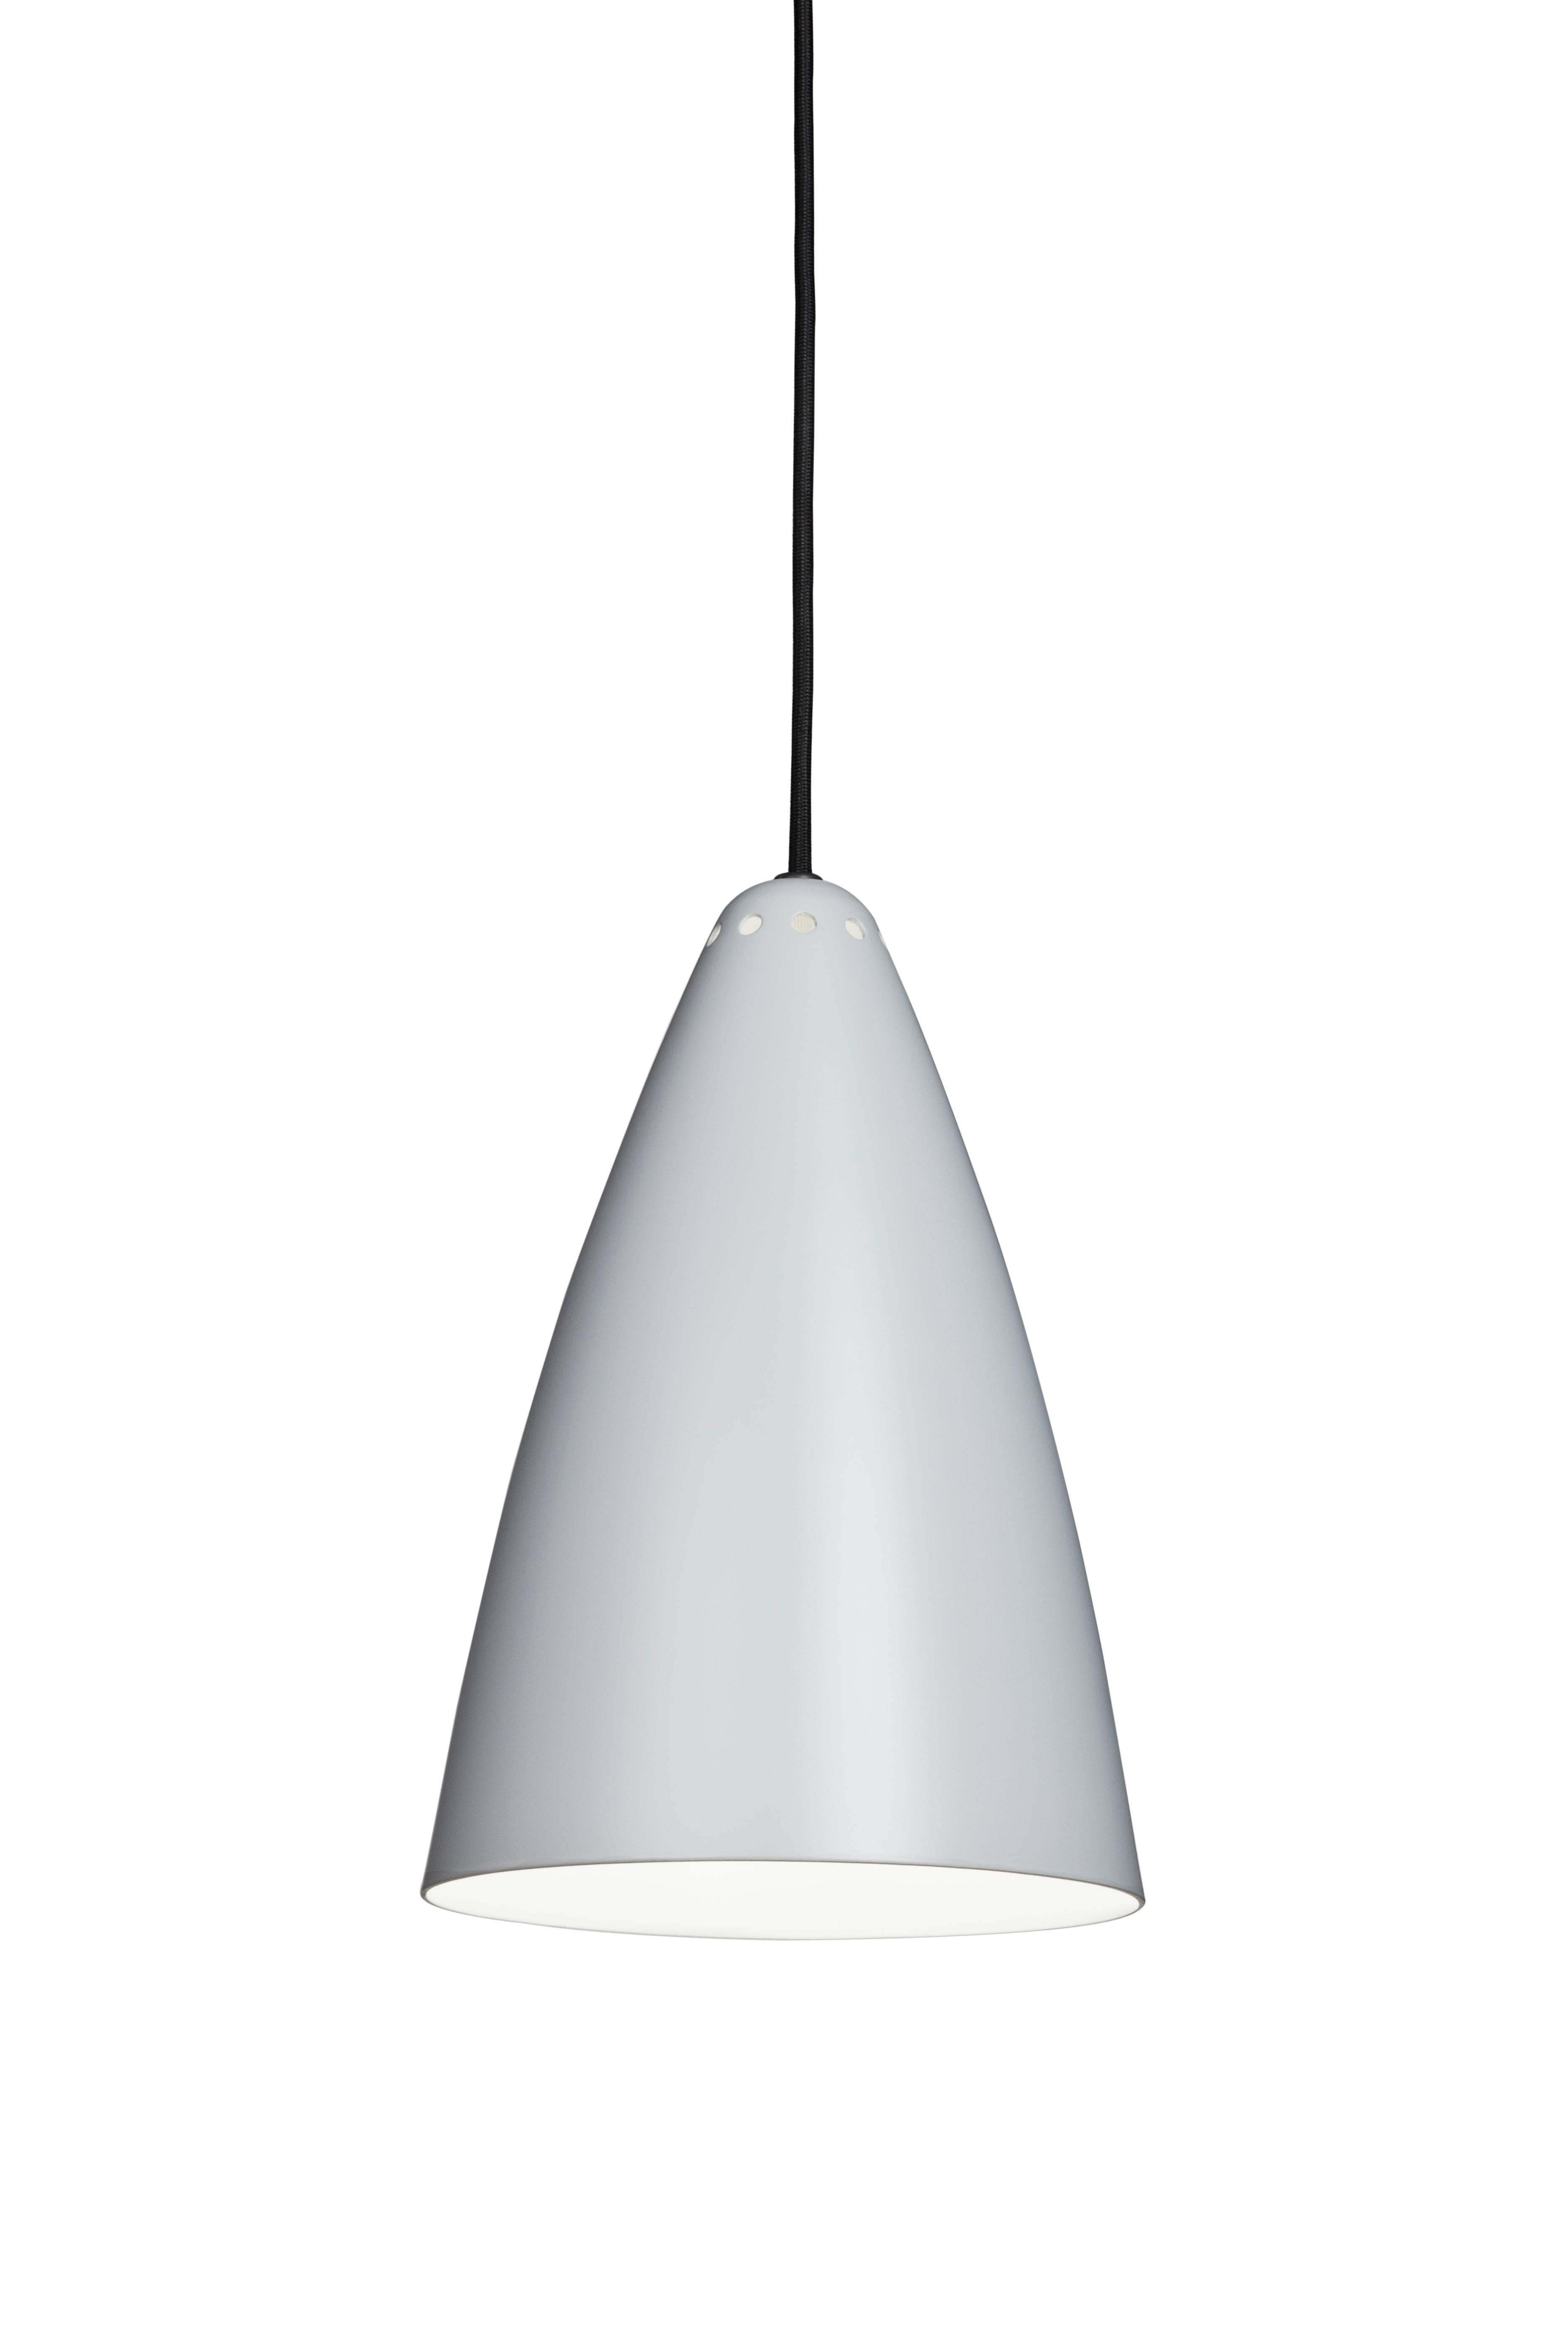 Lisa Johansson-Pape '1959' White Pendant for Innolux Oy. Originally designed in 1959, these authorized re-editions are true to the original charming simplicity of Pape's iconic Finnish design. The white interior of each metallic shade efficiently